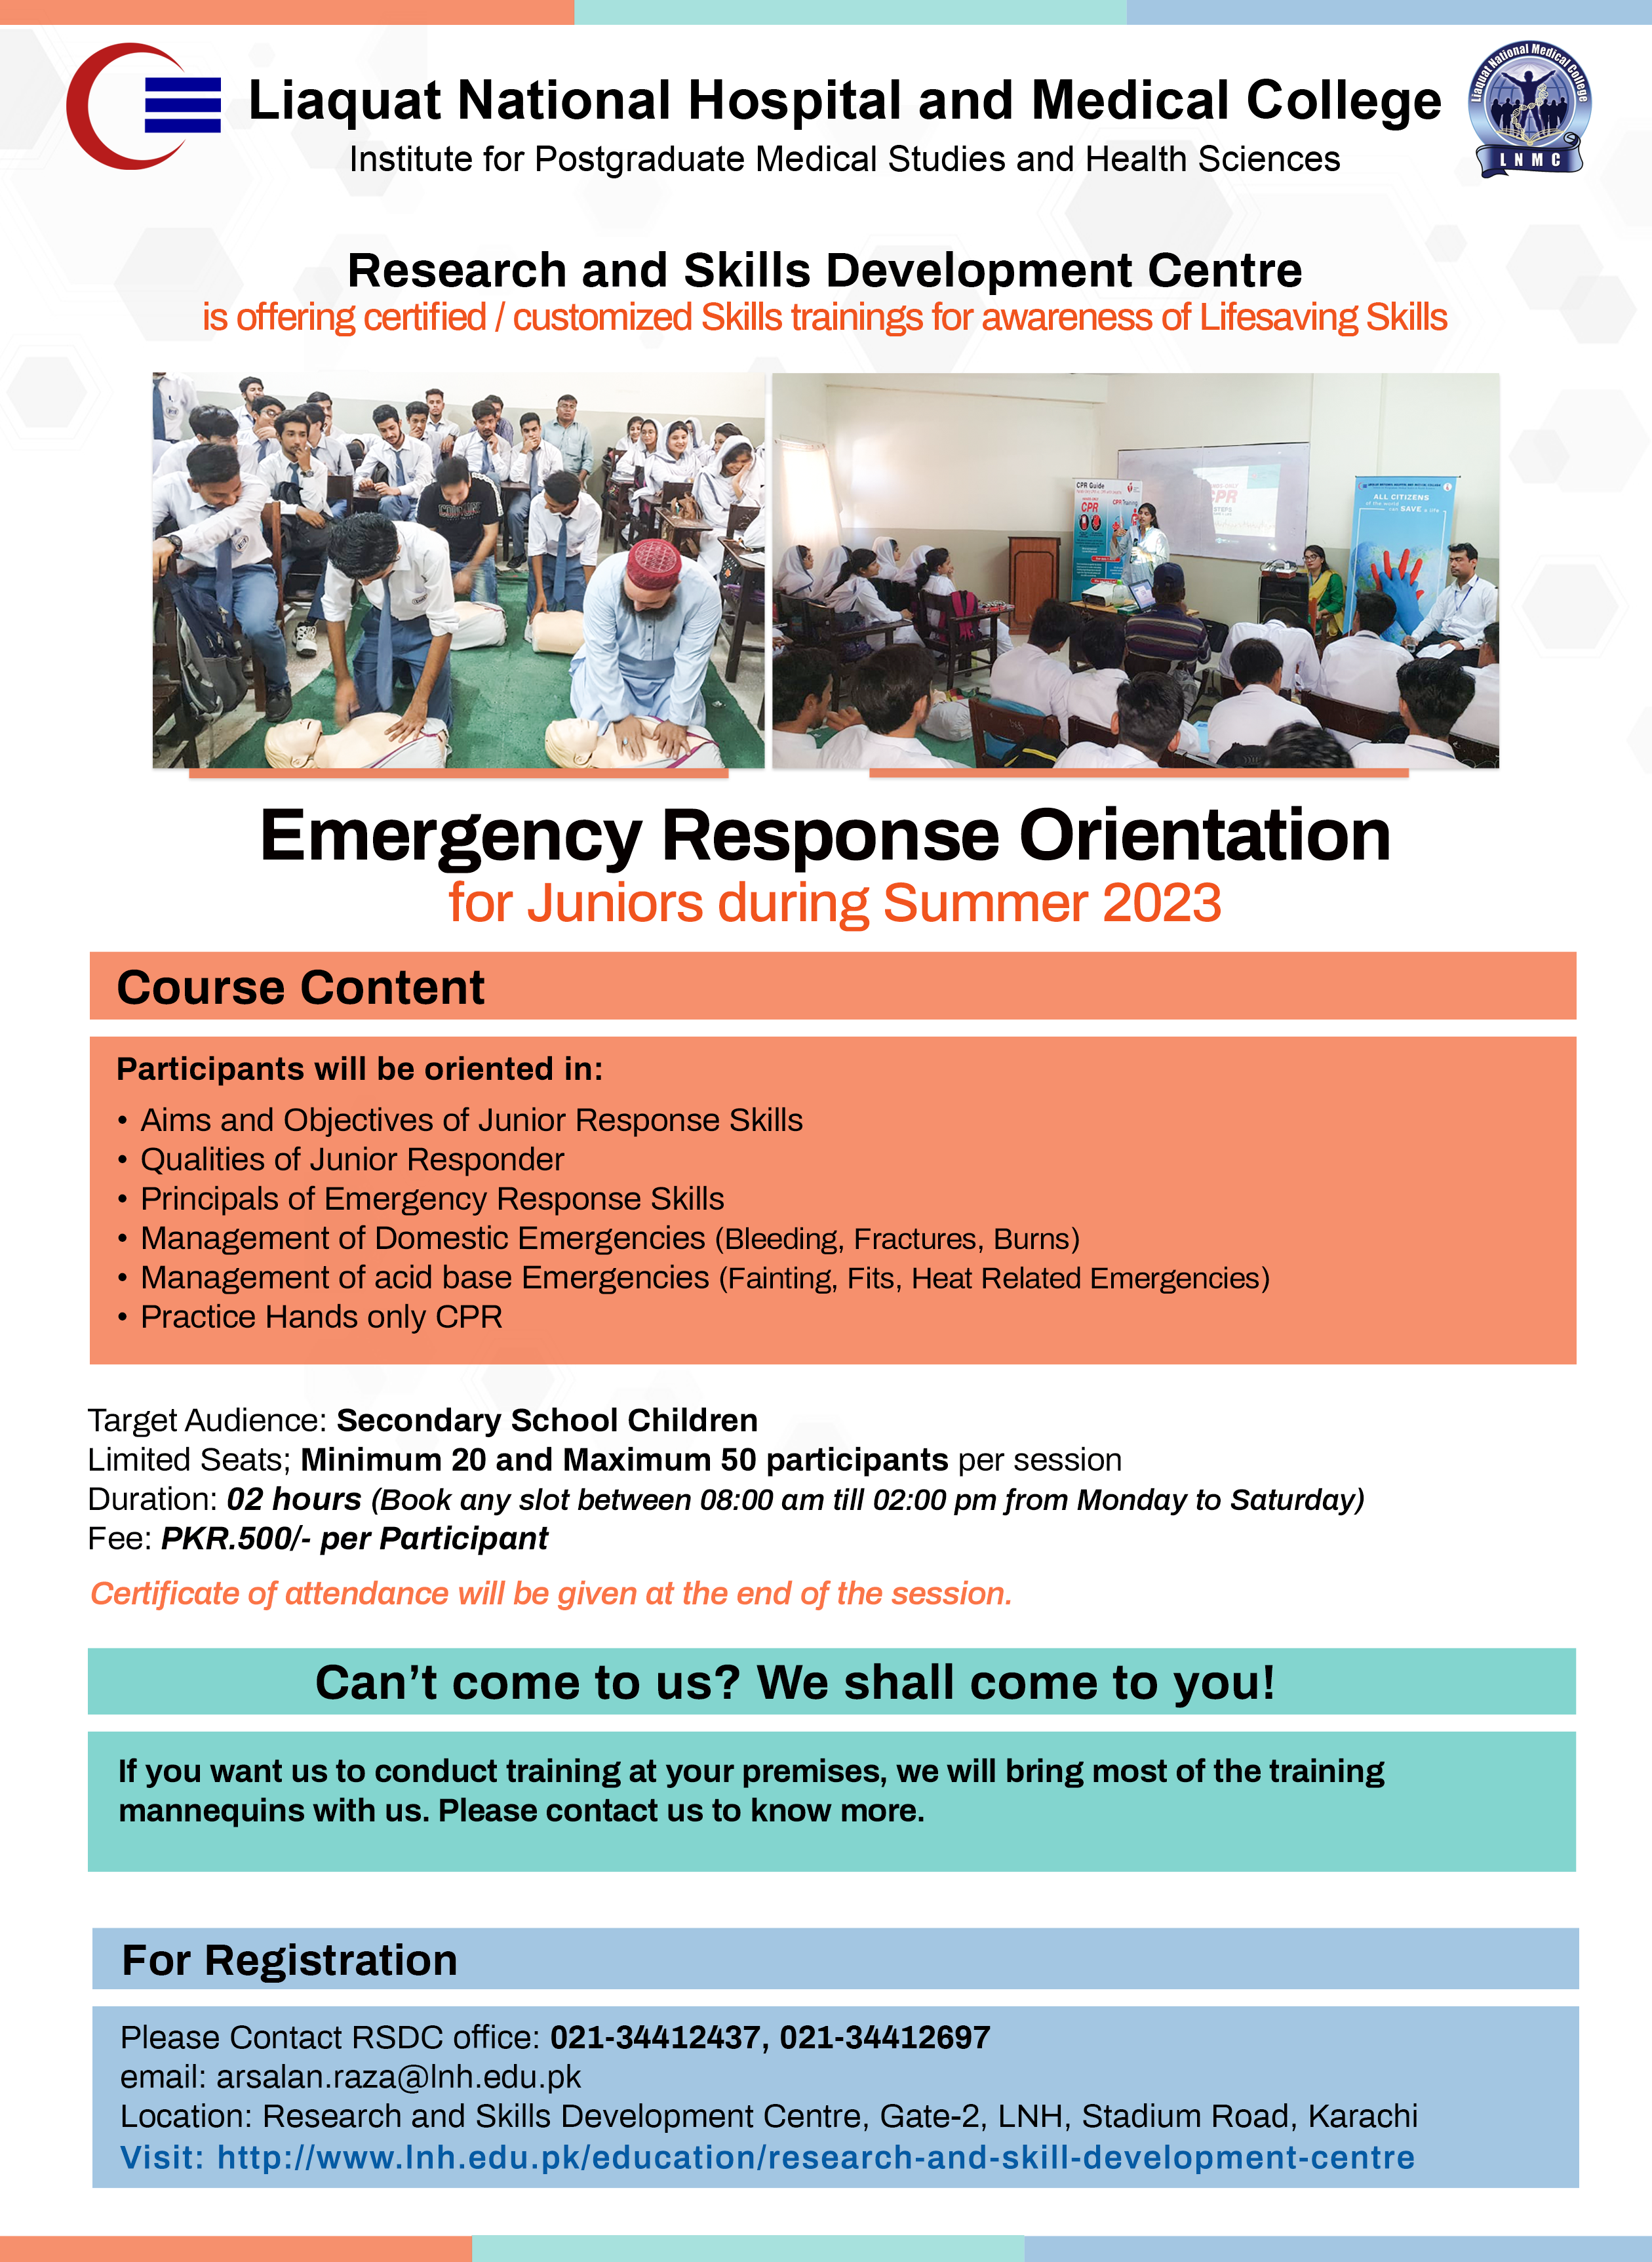 Emergency Response Orientation for Juniors during Summer 2023